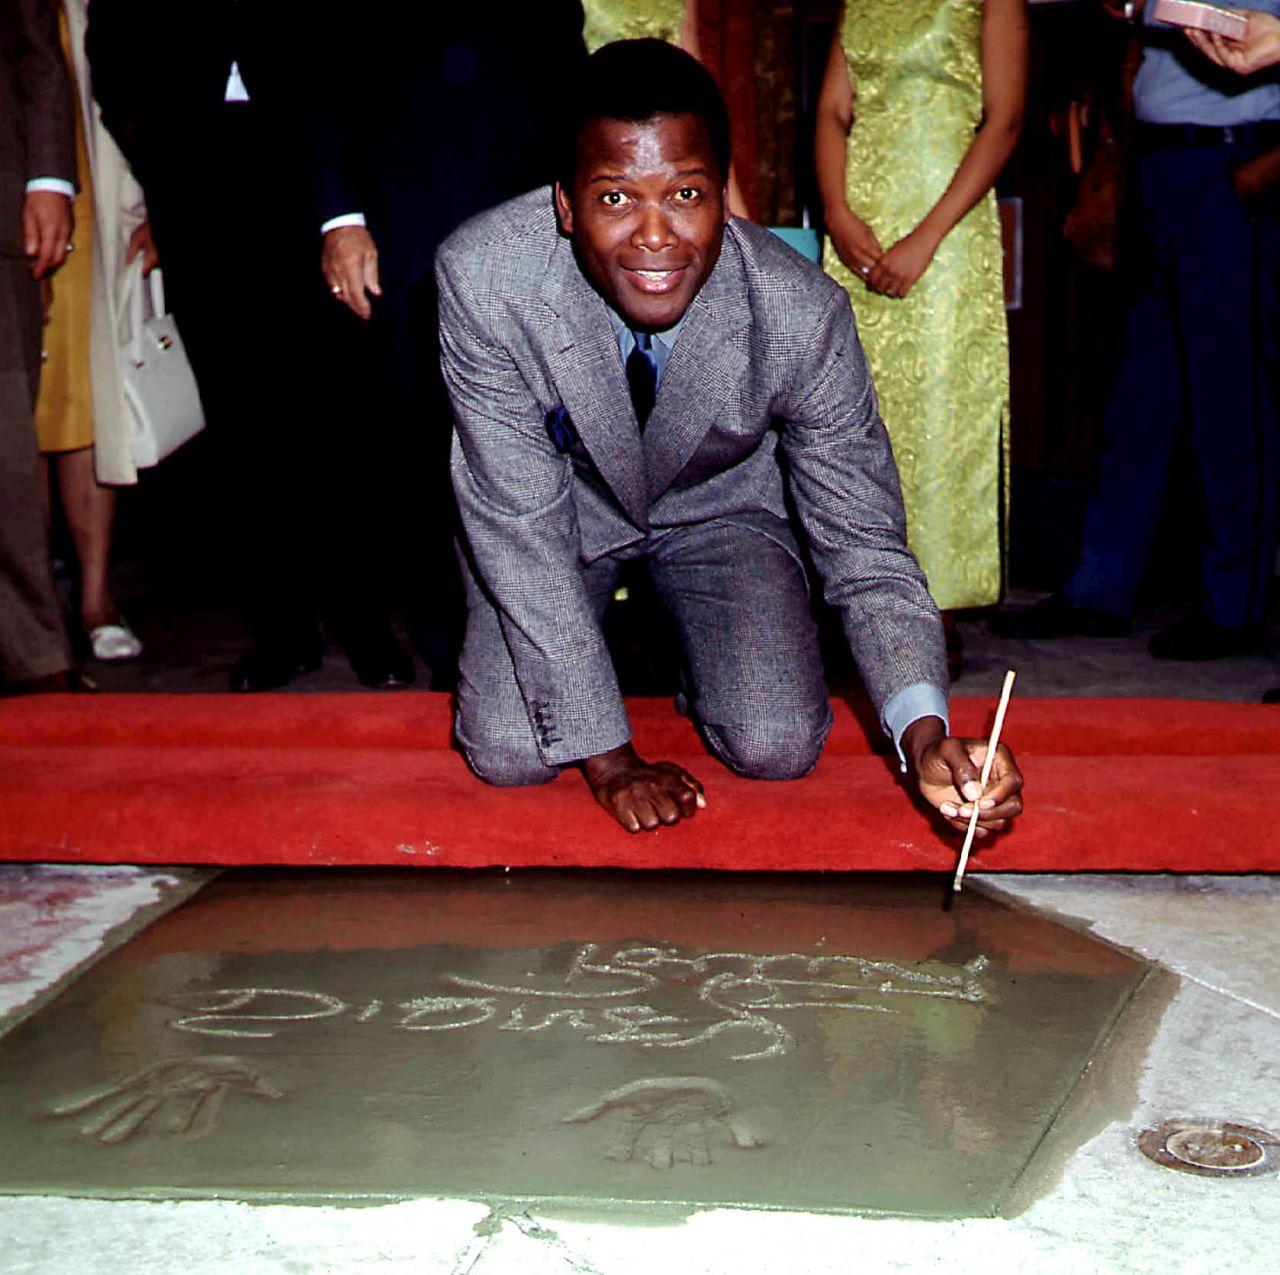 Poitier signs his name and leaves his handprints at the famous Grauman's Chinese Theatre in Hollywood.